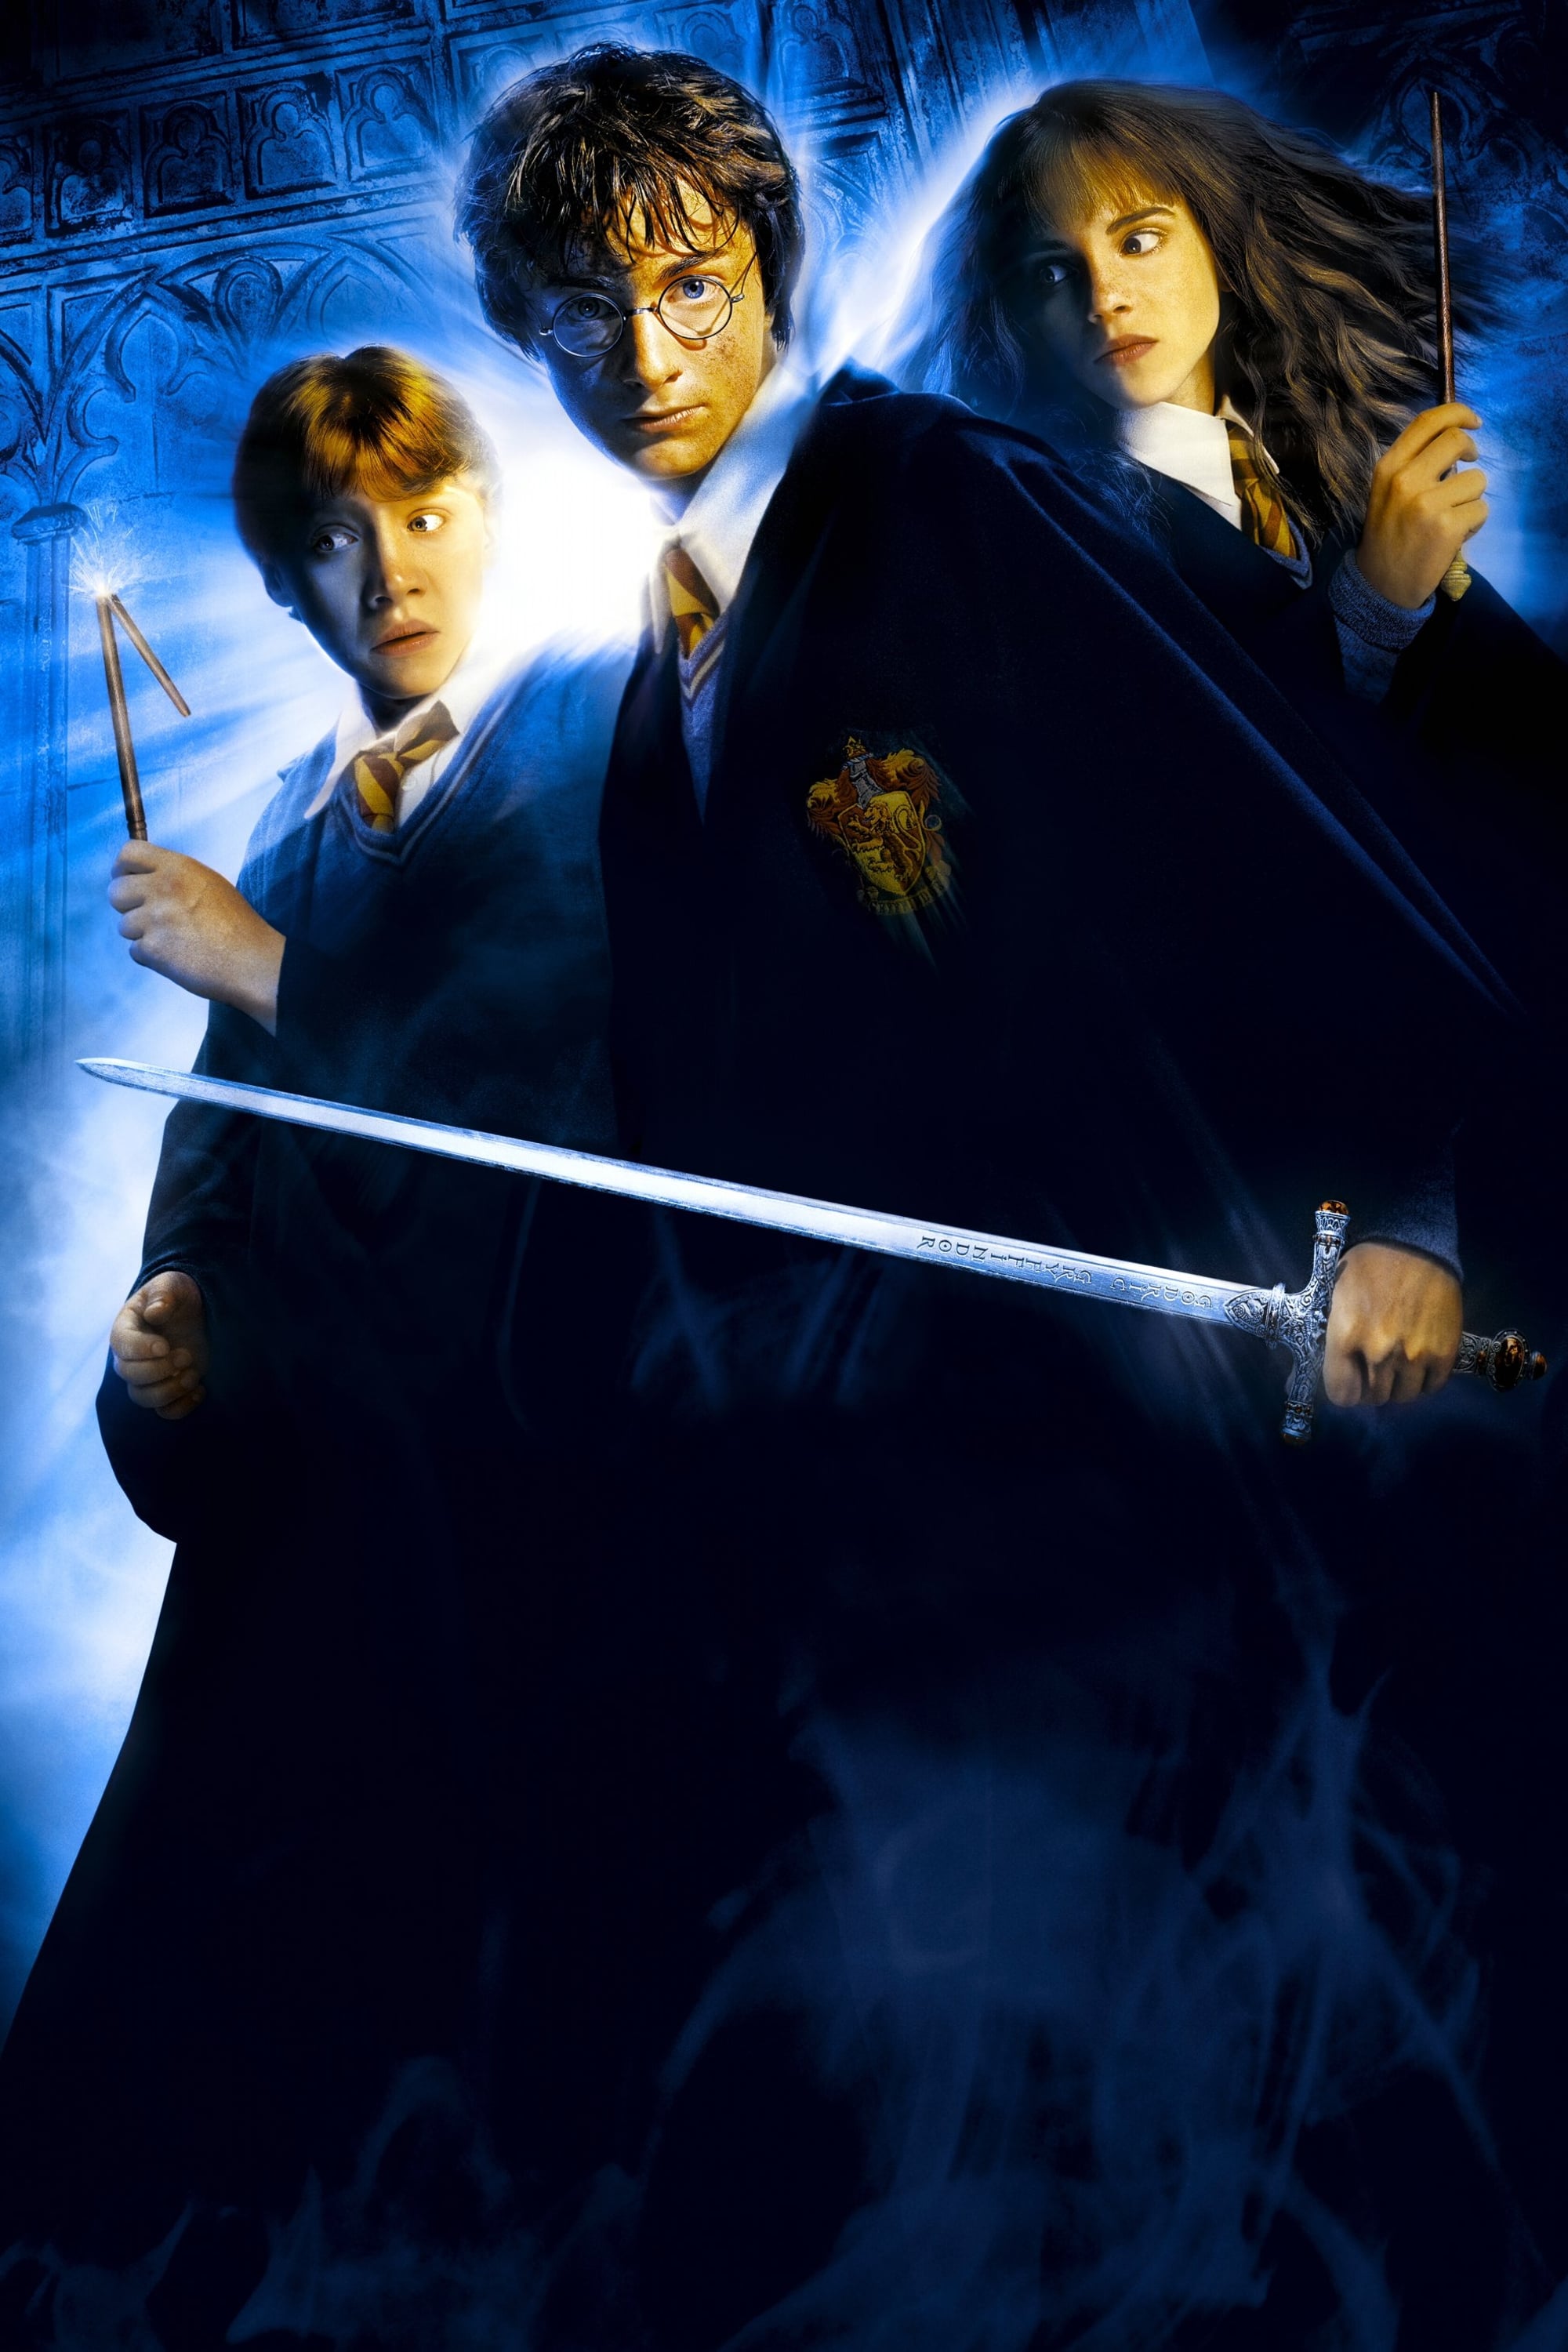 Watch Harry Potter and the Chamber of Secrets (2002) Full Movie Online - Harry Potter And The Chamber Of Secrets Movie Online Free